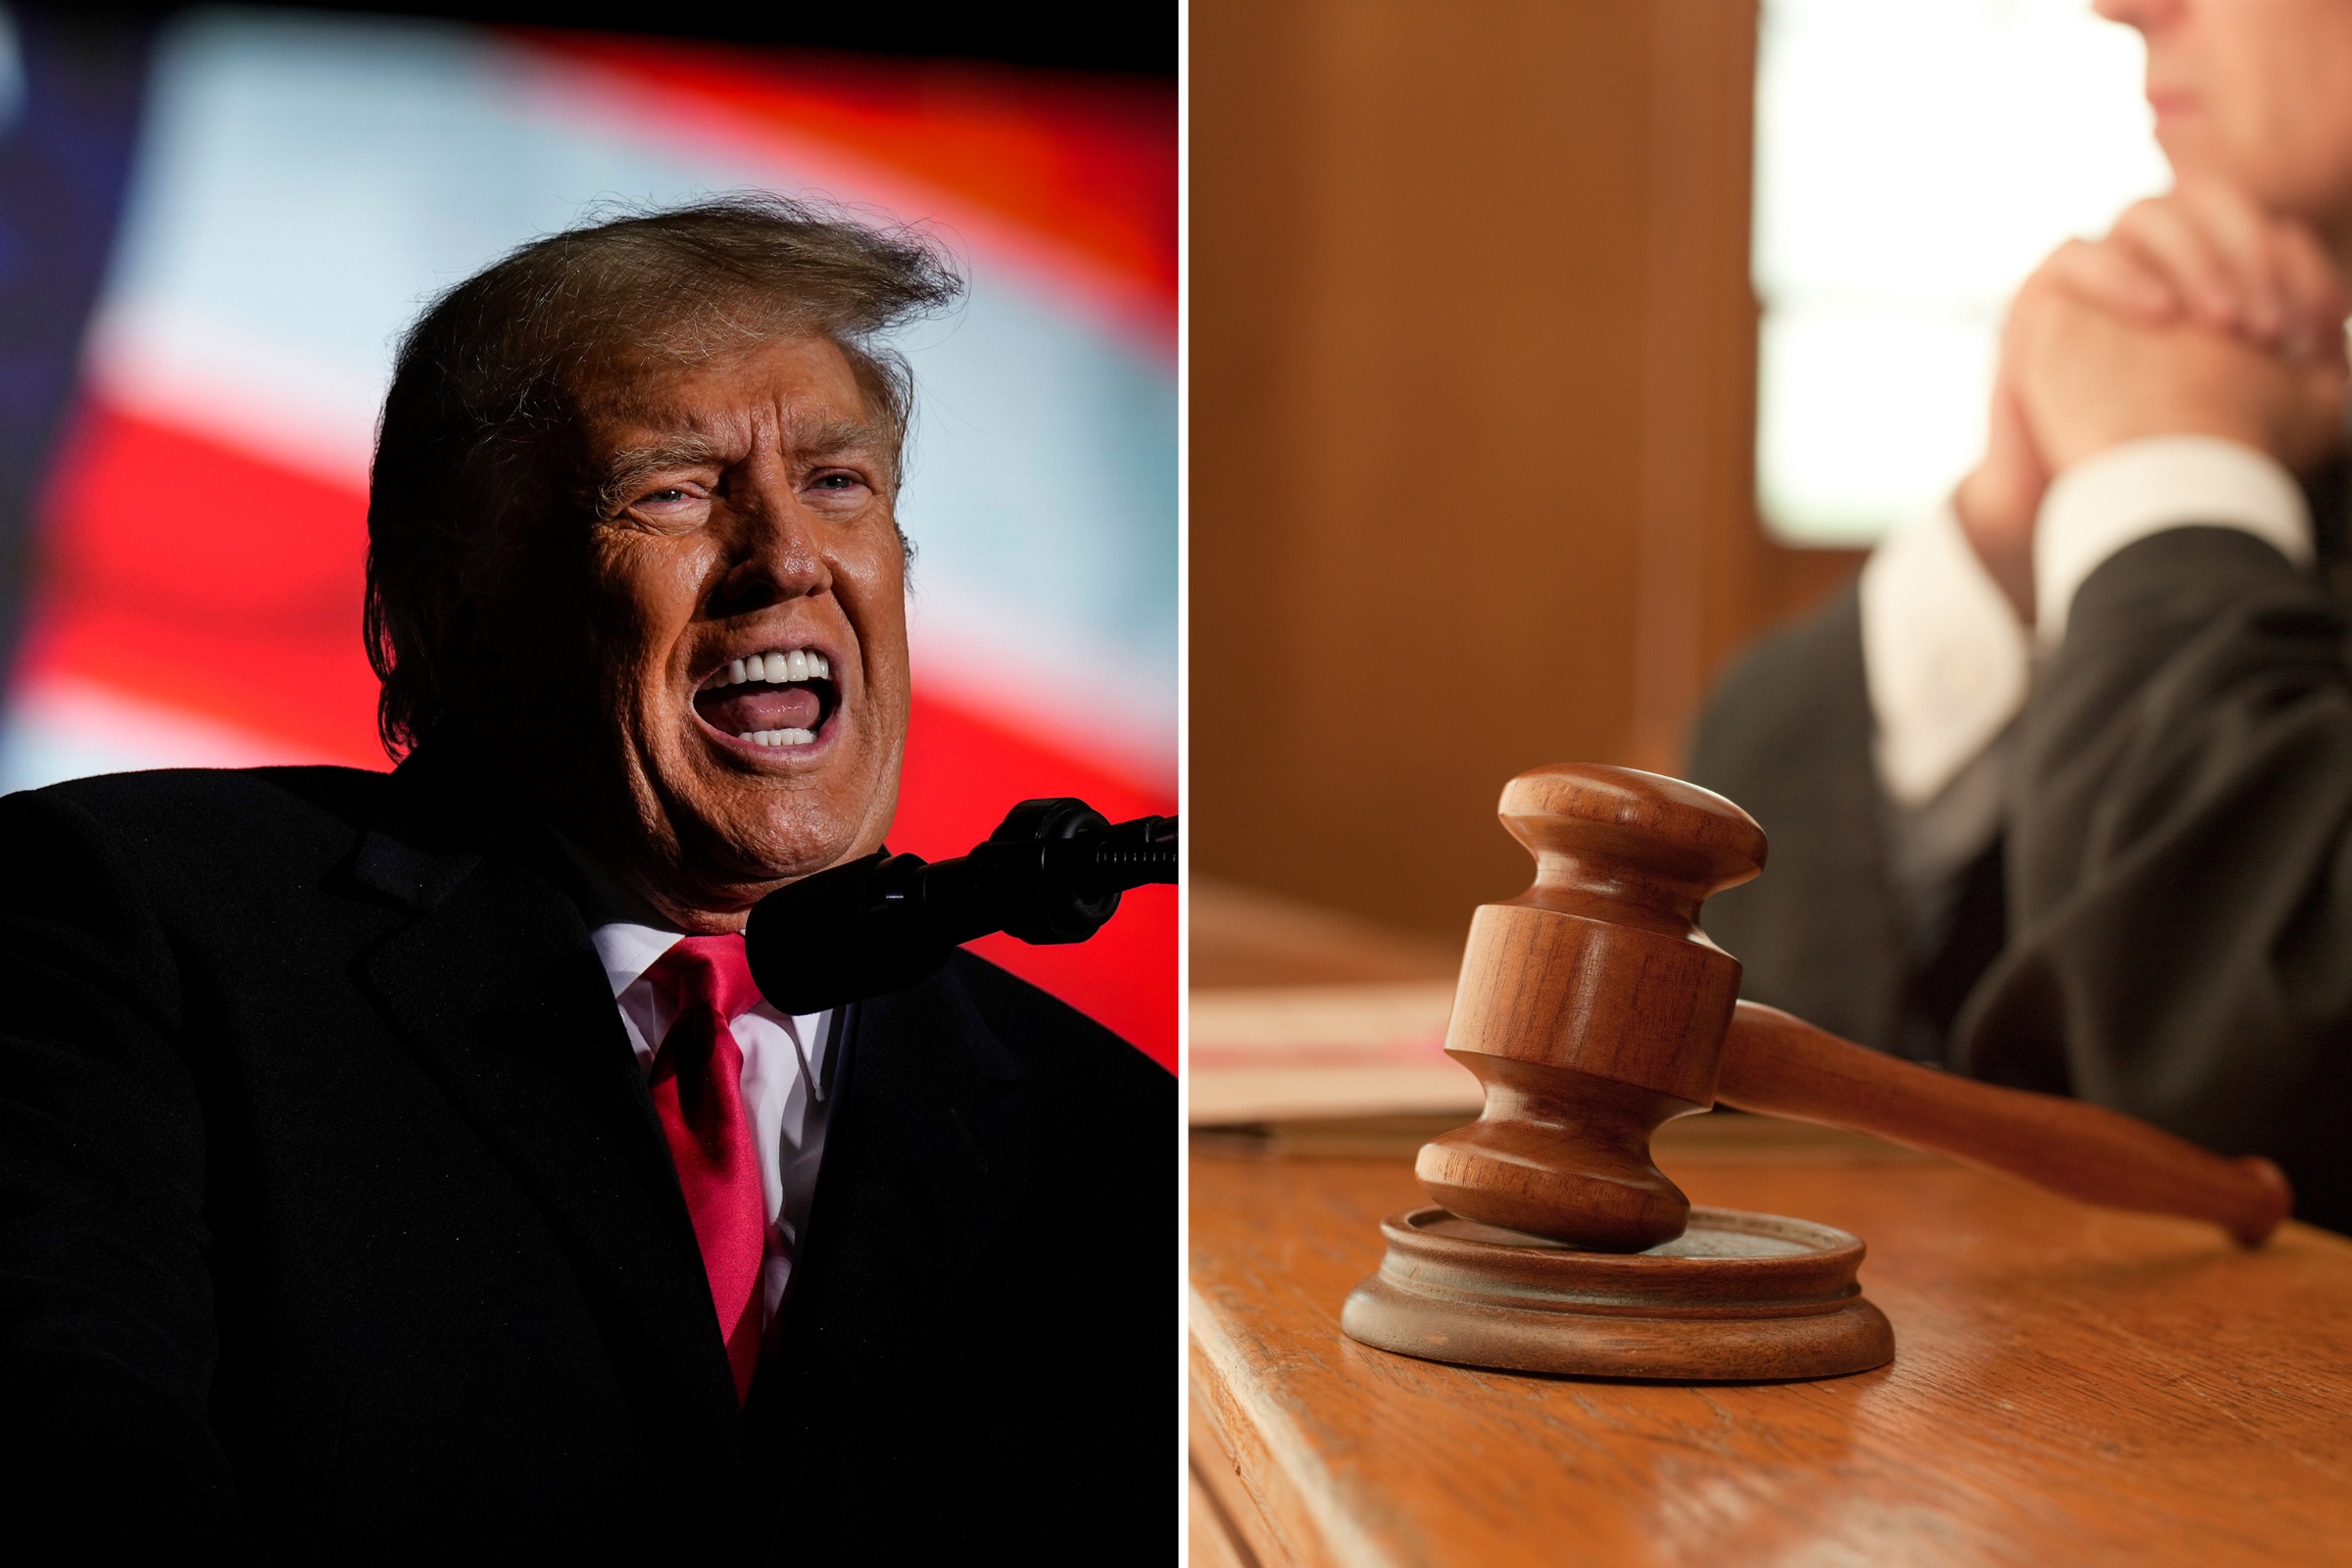 Trump About to Come 'Eyeball to Eyeball' With Judge He Trashed: Kirschner